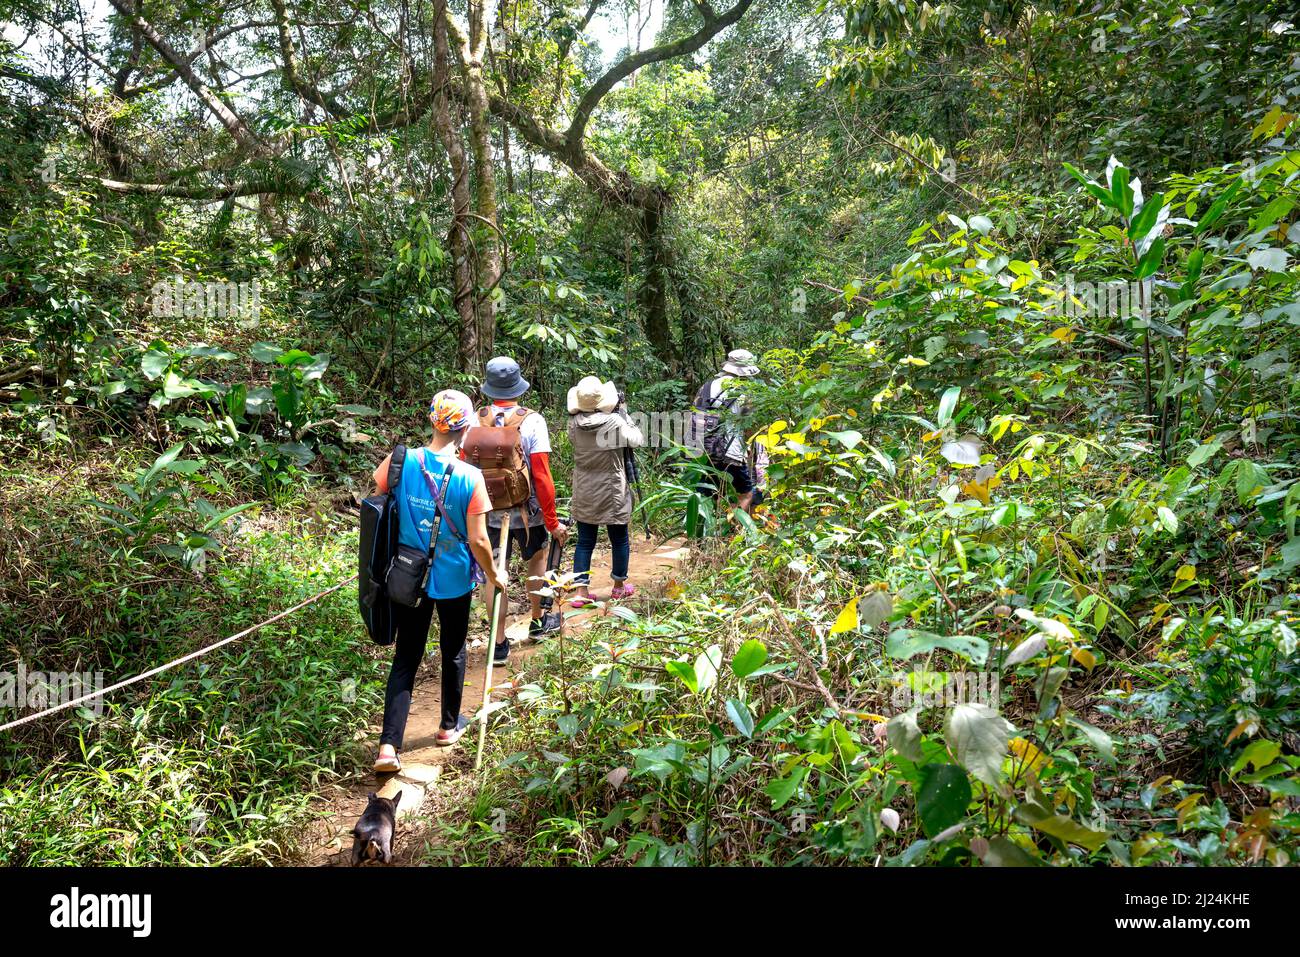 Kon Chu Rang Nature Reserve, Gia Lai Province, Vietnam, March 6, 2022: tourists are walking through the forest to explore the rainforest in Kon Chu Ra Stock Photo